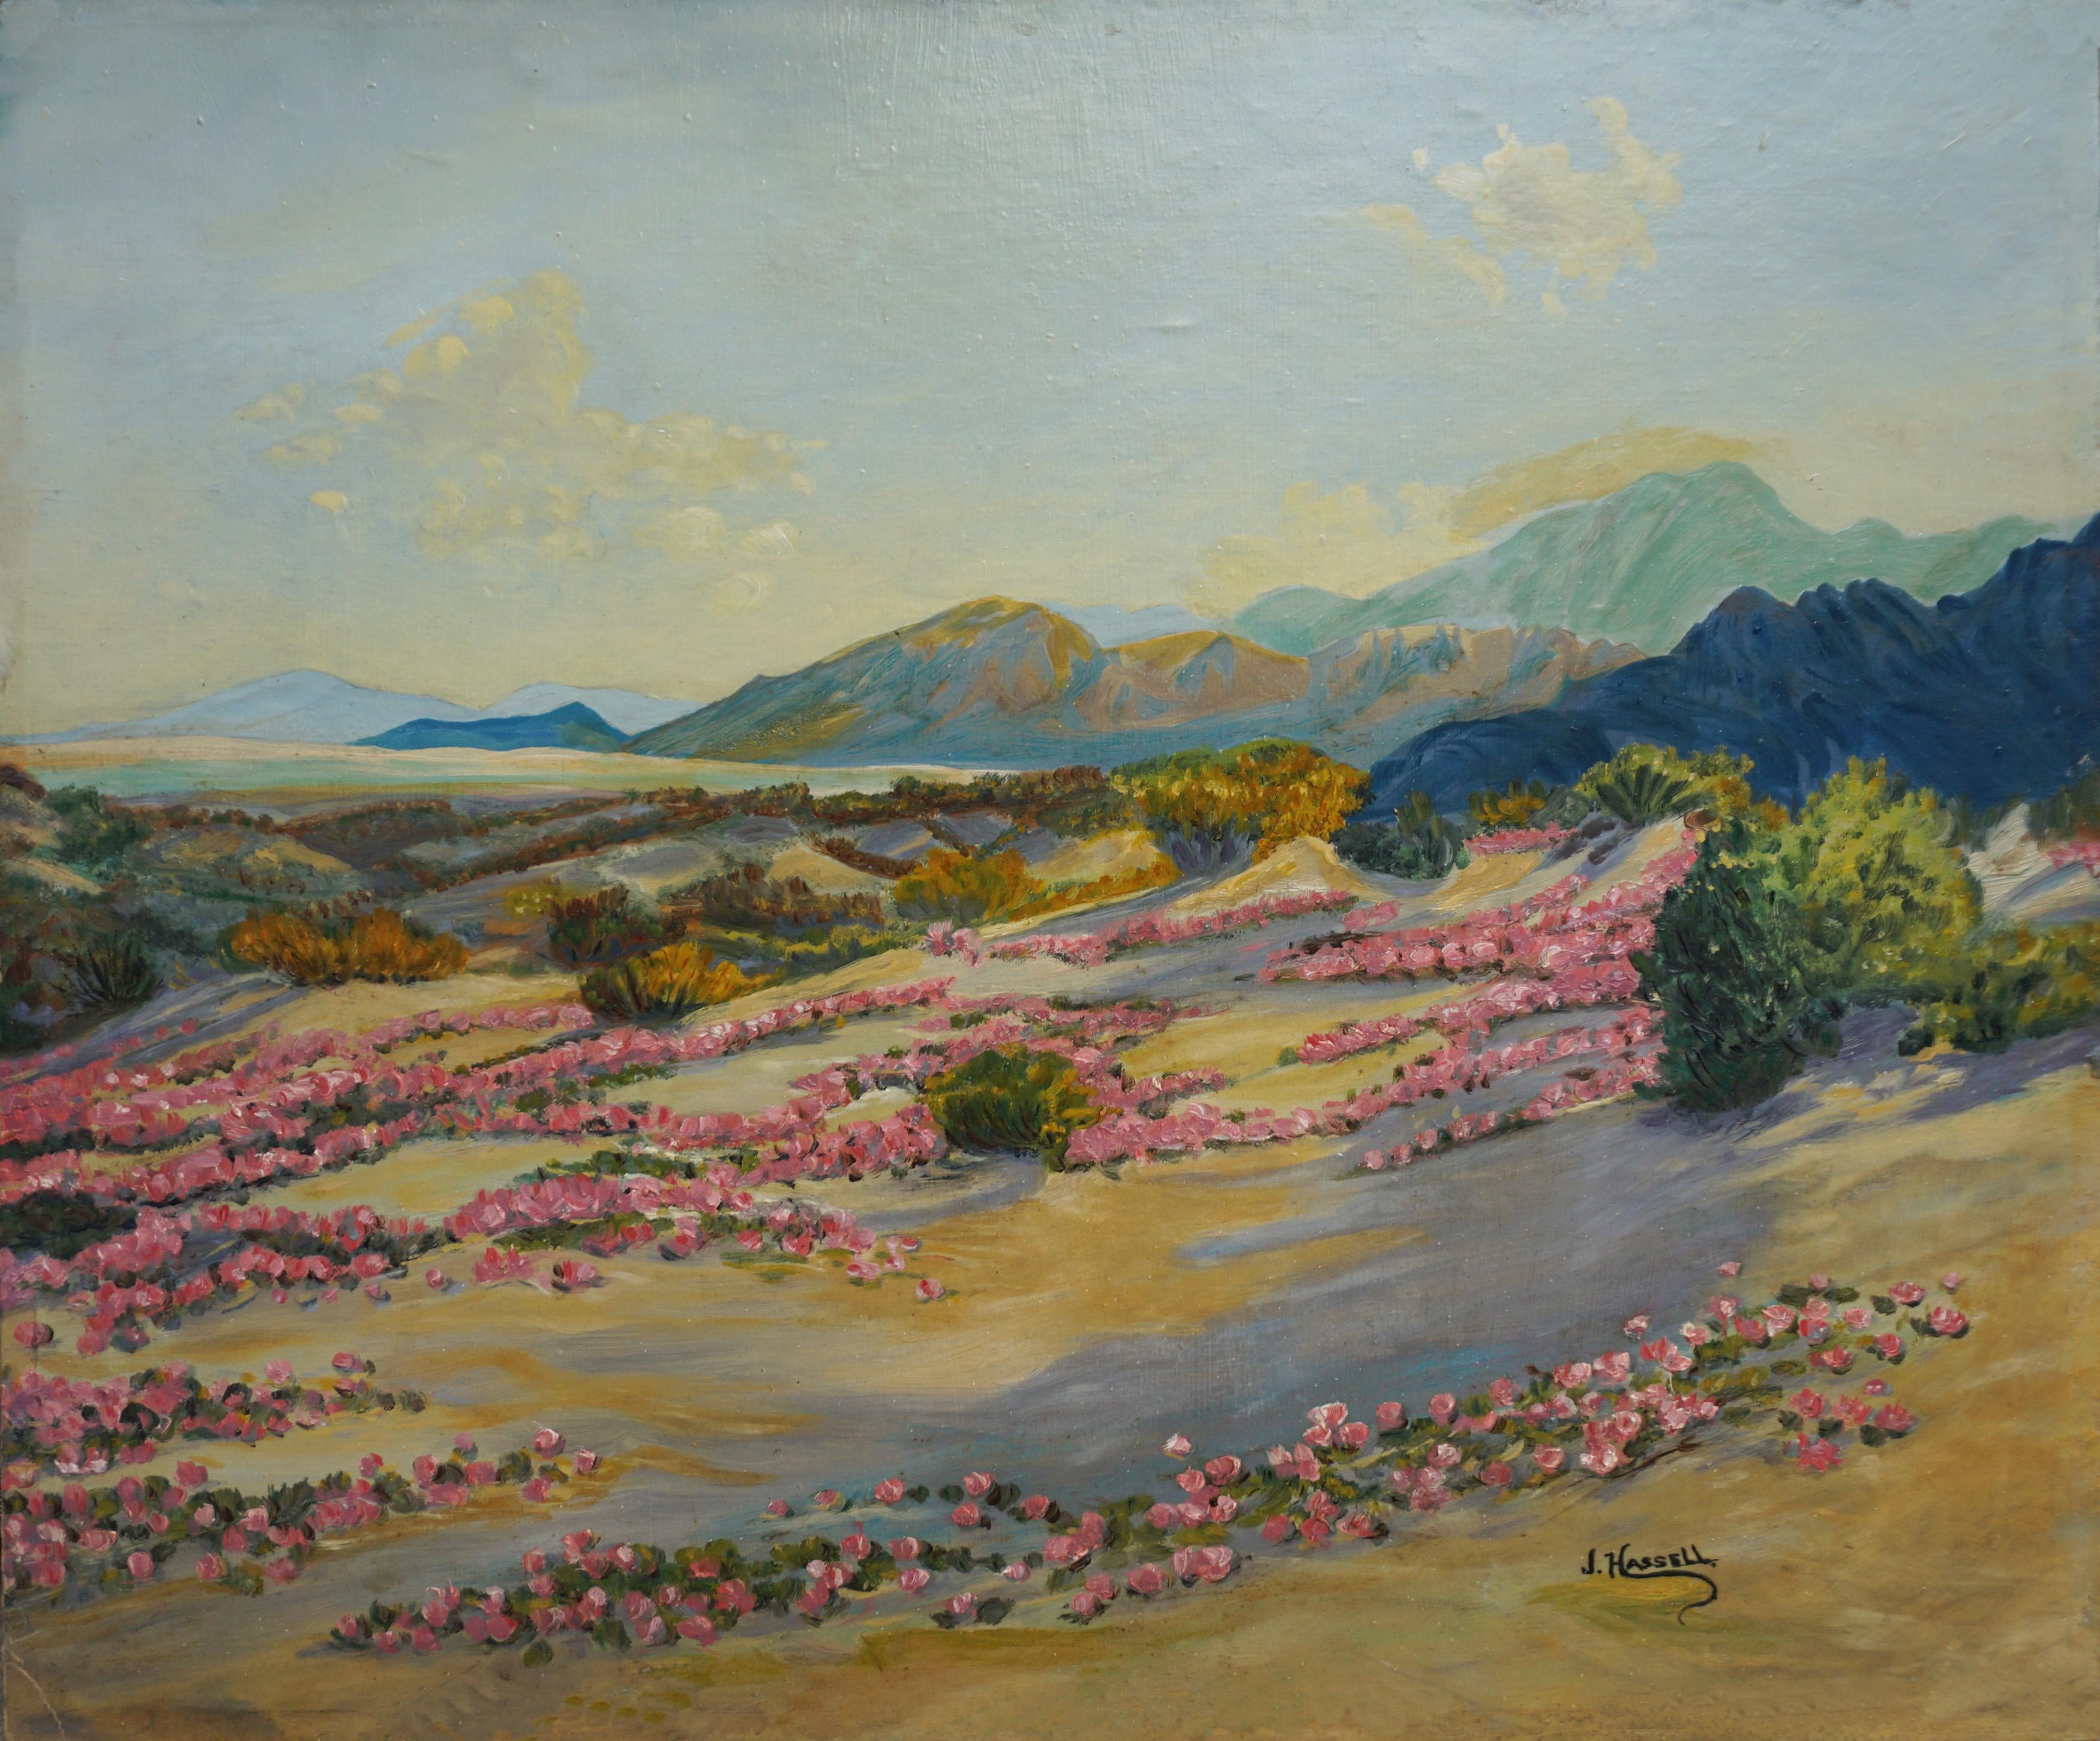 J. Hassell Landscape Painting - Mid Century Palm Springs in Bloom 